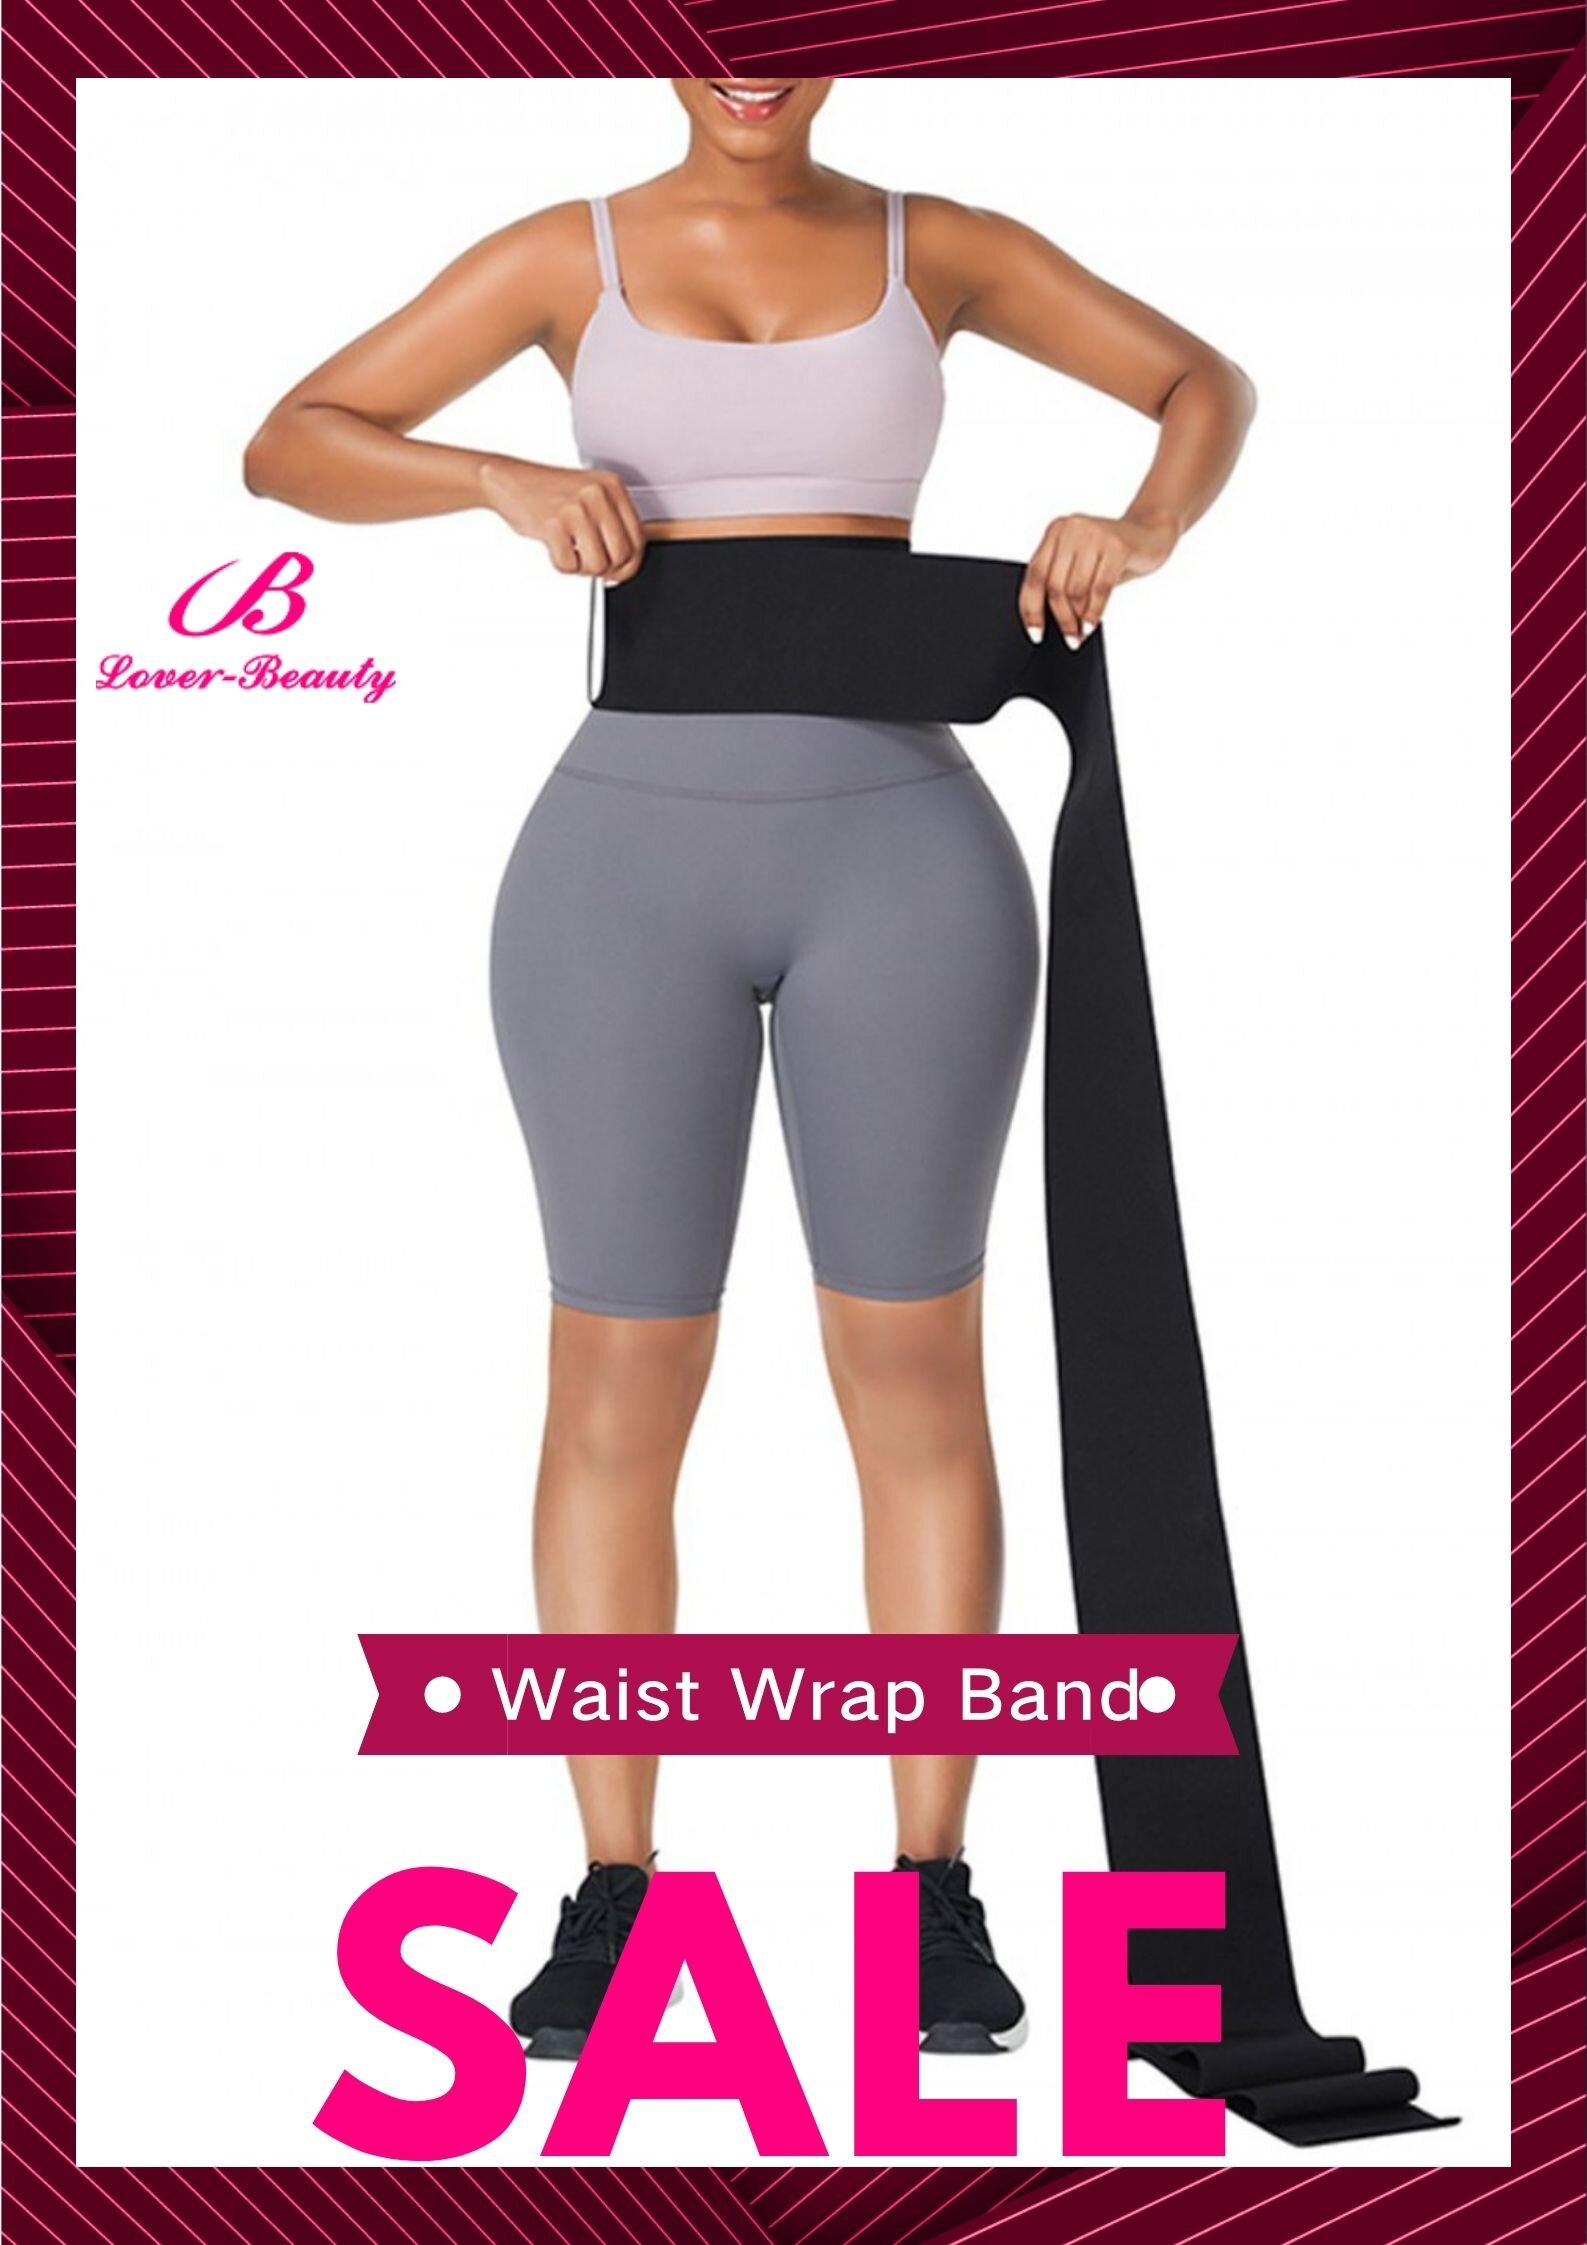 Waist Wrap Band Wholesale at Lover-Beauty